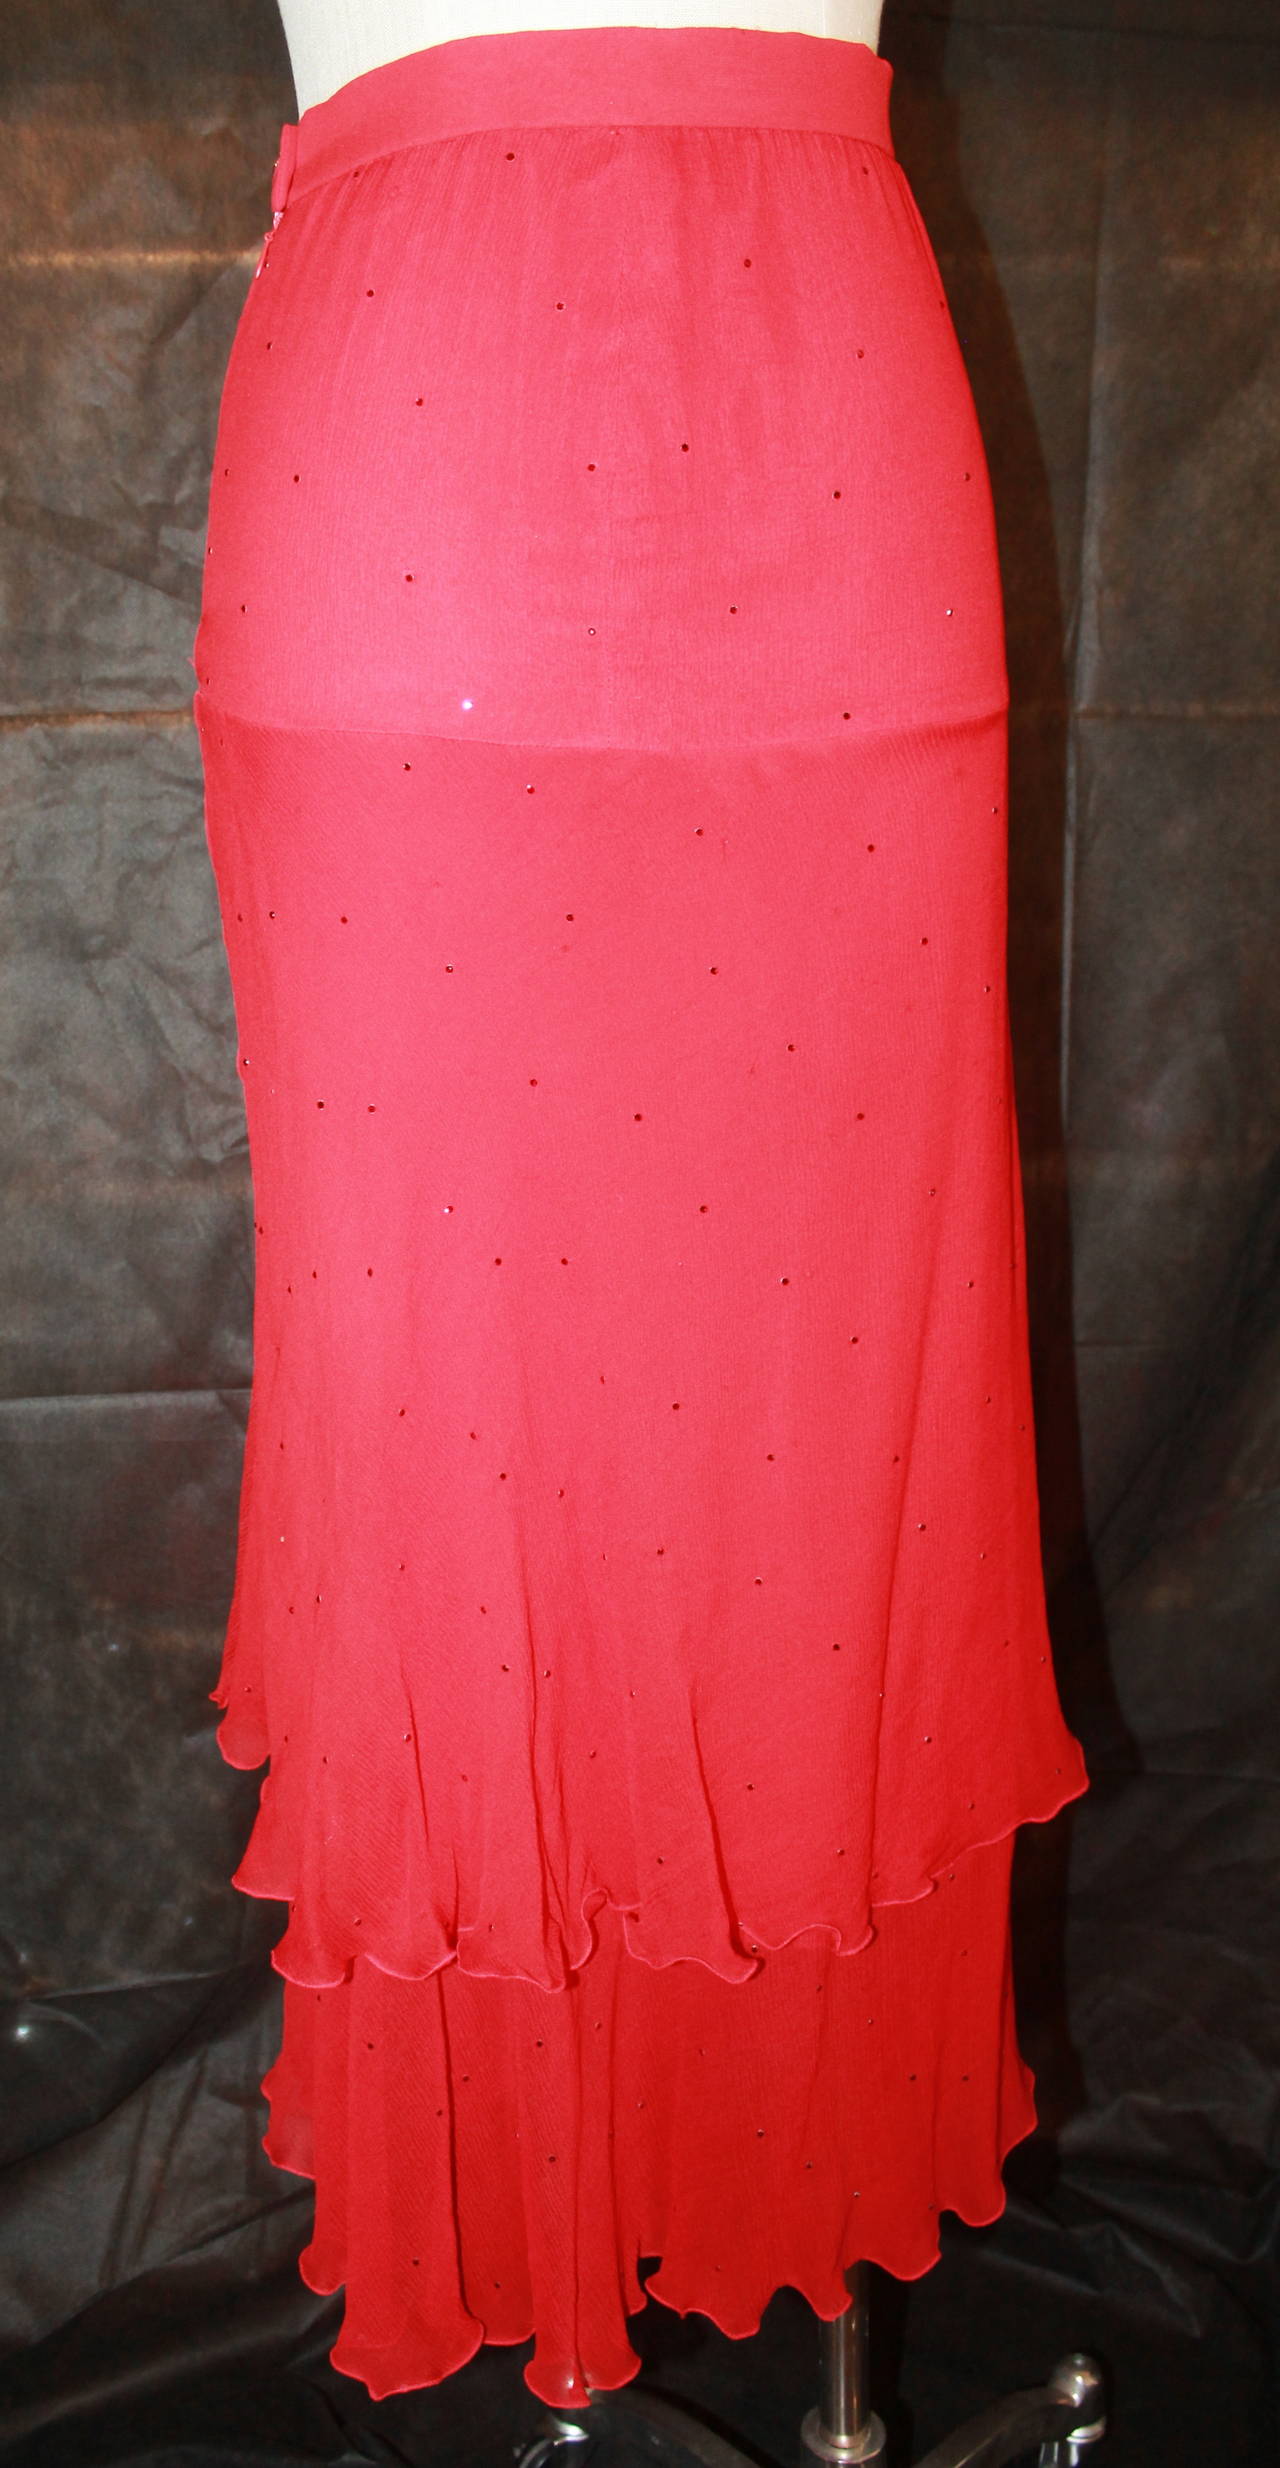 Chanel Vintage Red Silk Chiffon Tiered Skirt with Rhinestones - 2. This skirt is in very good condition with very minor signs of wear. It is from the 1980s.

Measurements:
Waist- 26"
Hips- 3"
Length- 36.5"